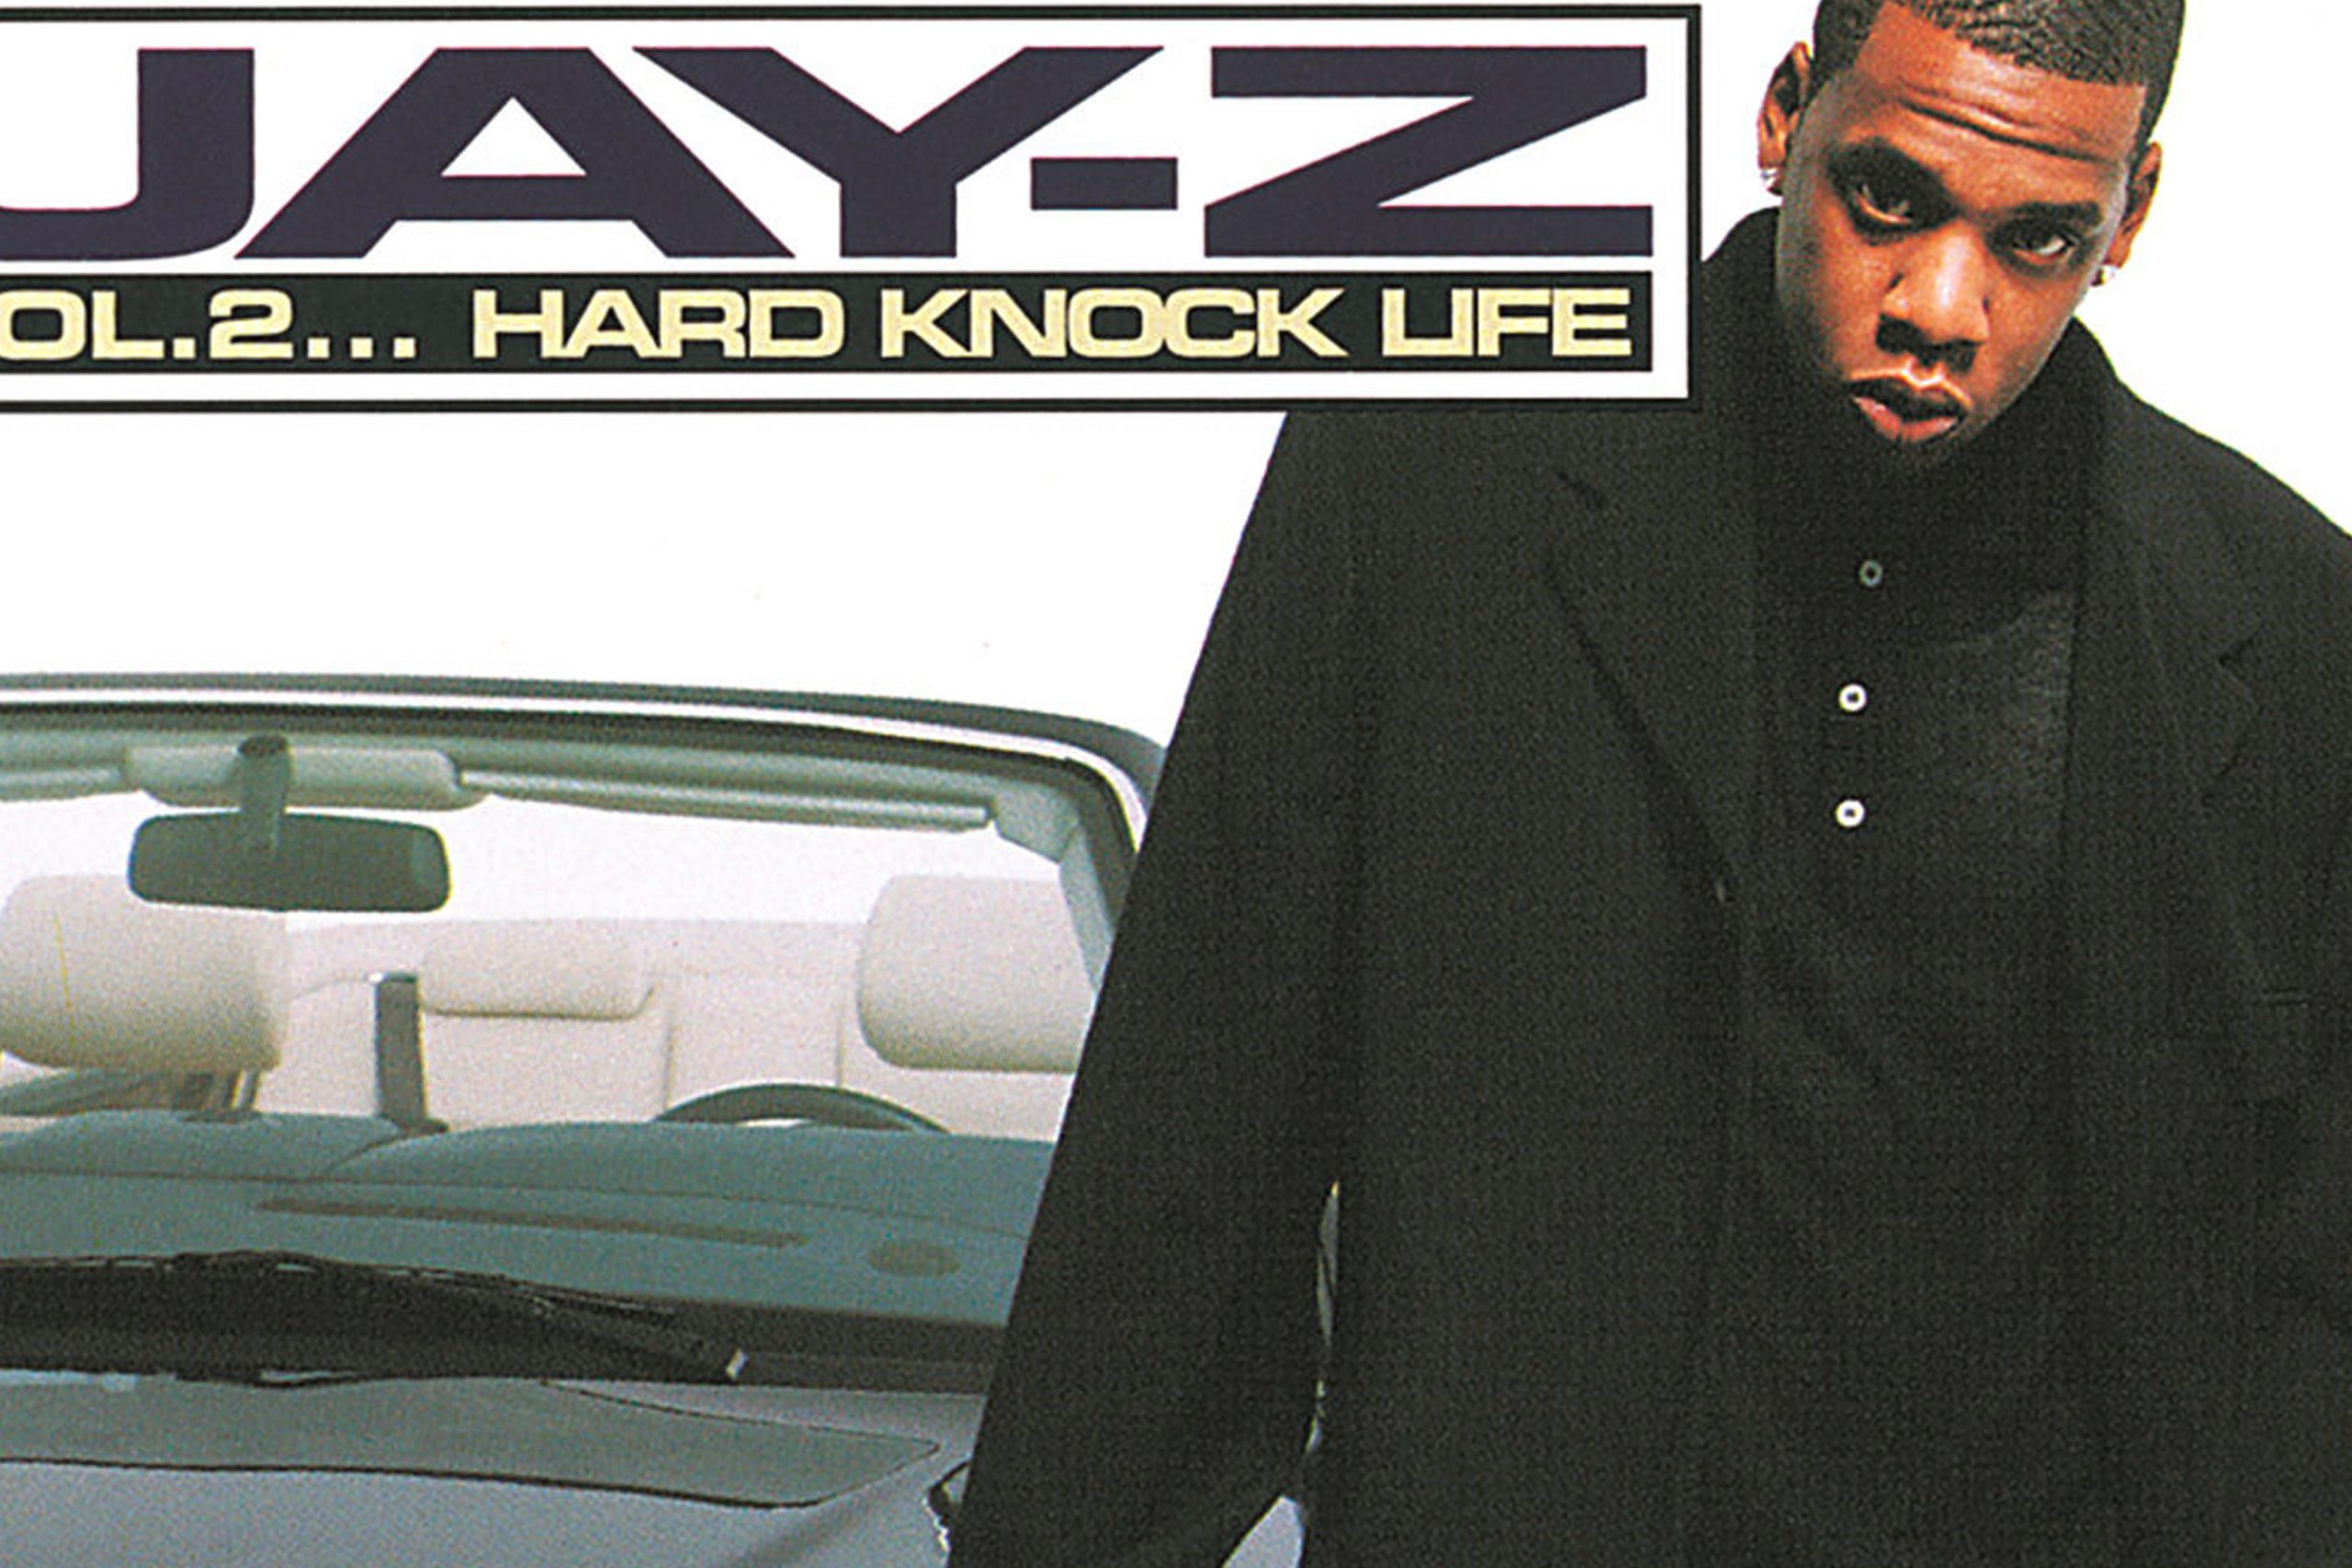 JAY-Z's Vol. 2… Hard Knock Life, was released on 9/29/1998. - ROC